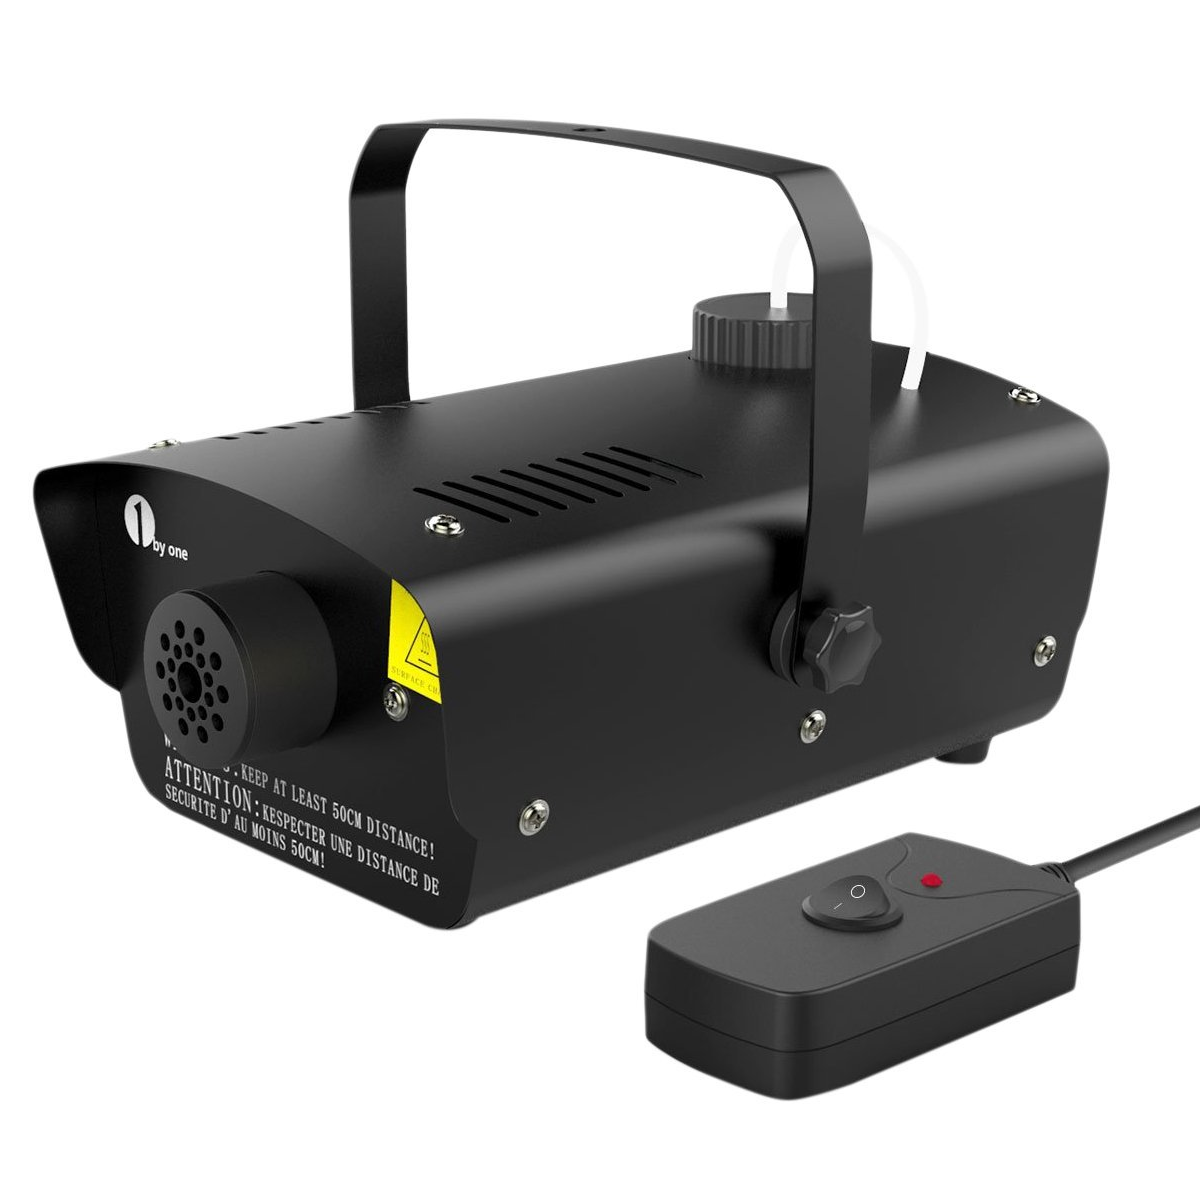 Halloween Fog Machine with Wired Remote Control Only $29.69 on Amazon! (#1 Best Seller!)